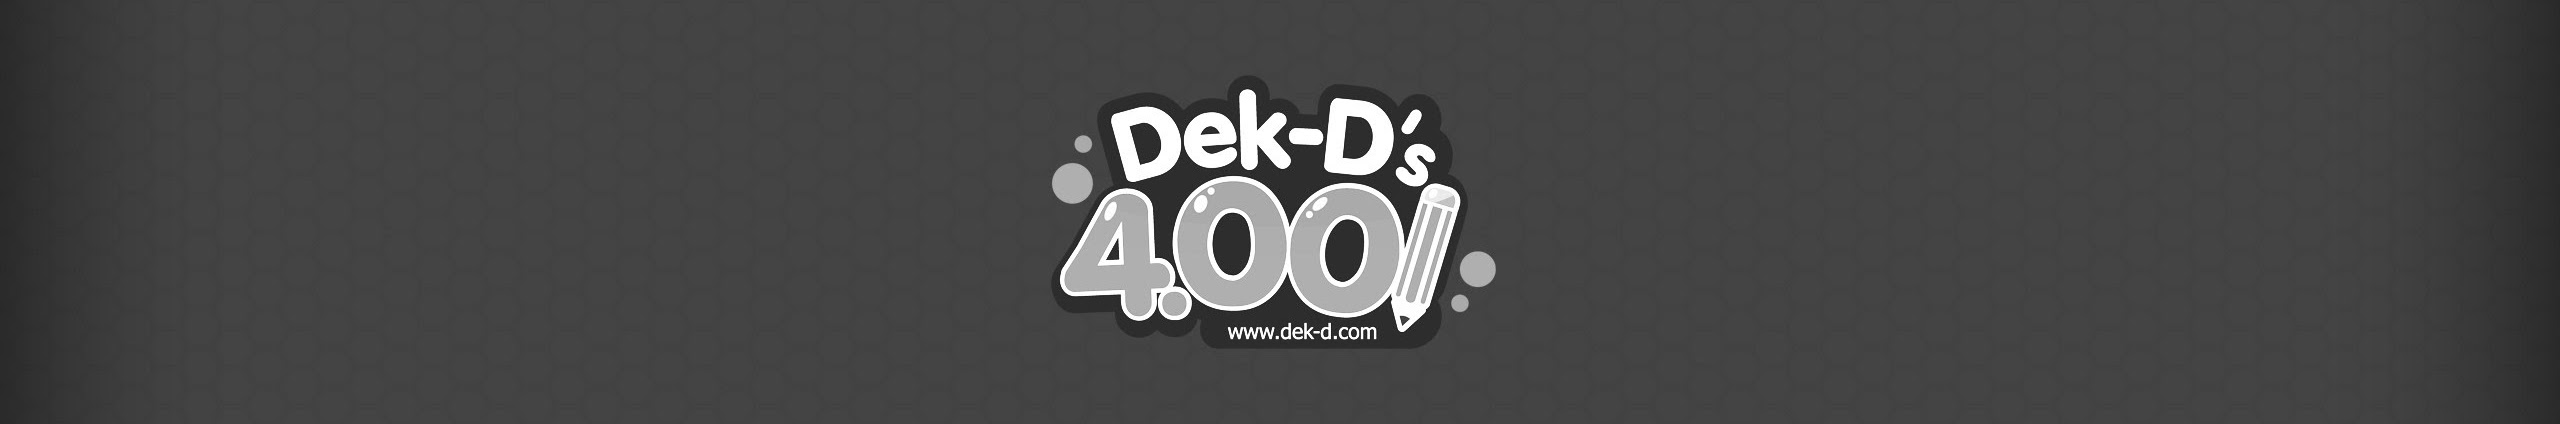 Dek-D 4.00 YouTube Channel Analytics and Report - Powered by NoxInfluencer  Mobile